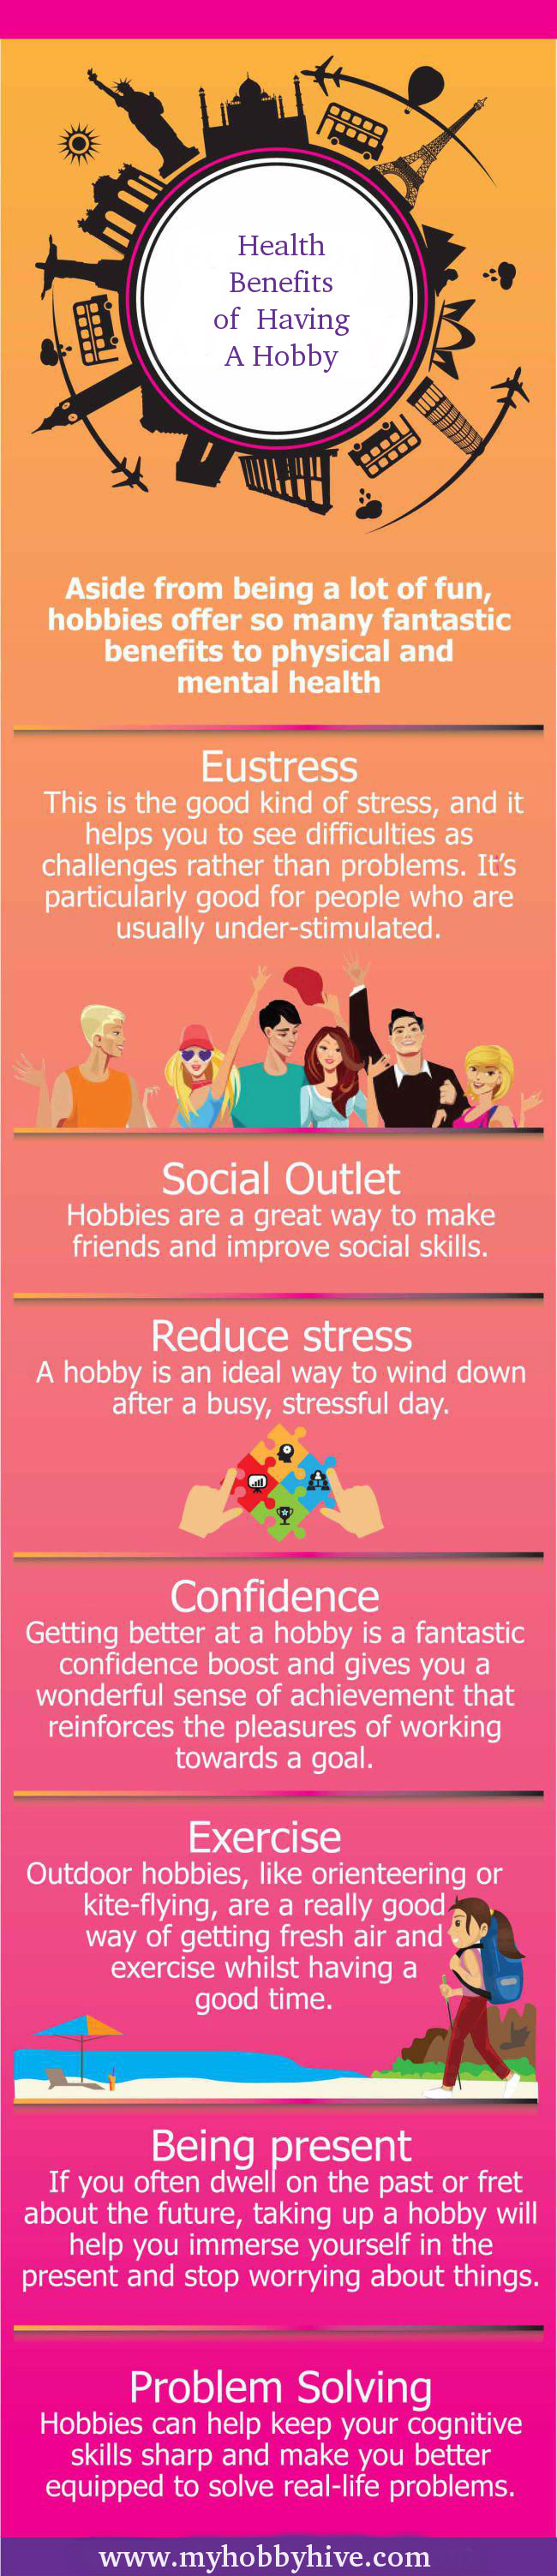 Hobbies for Men: 10 Life Changing Health Benefits [Infographic]